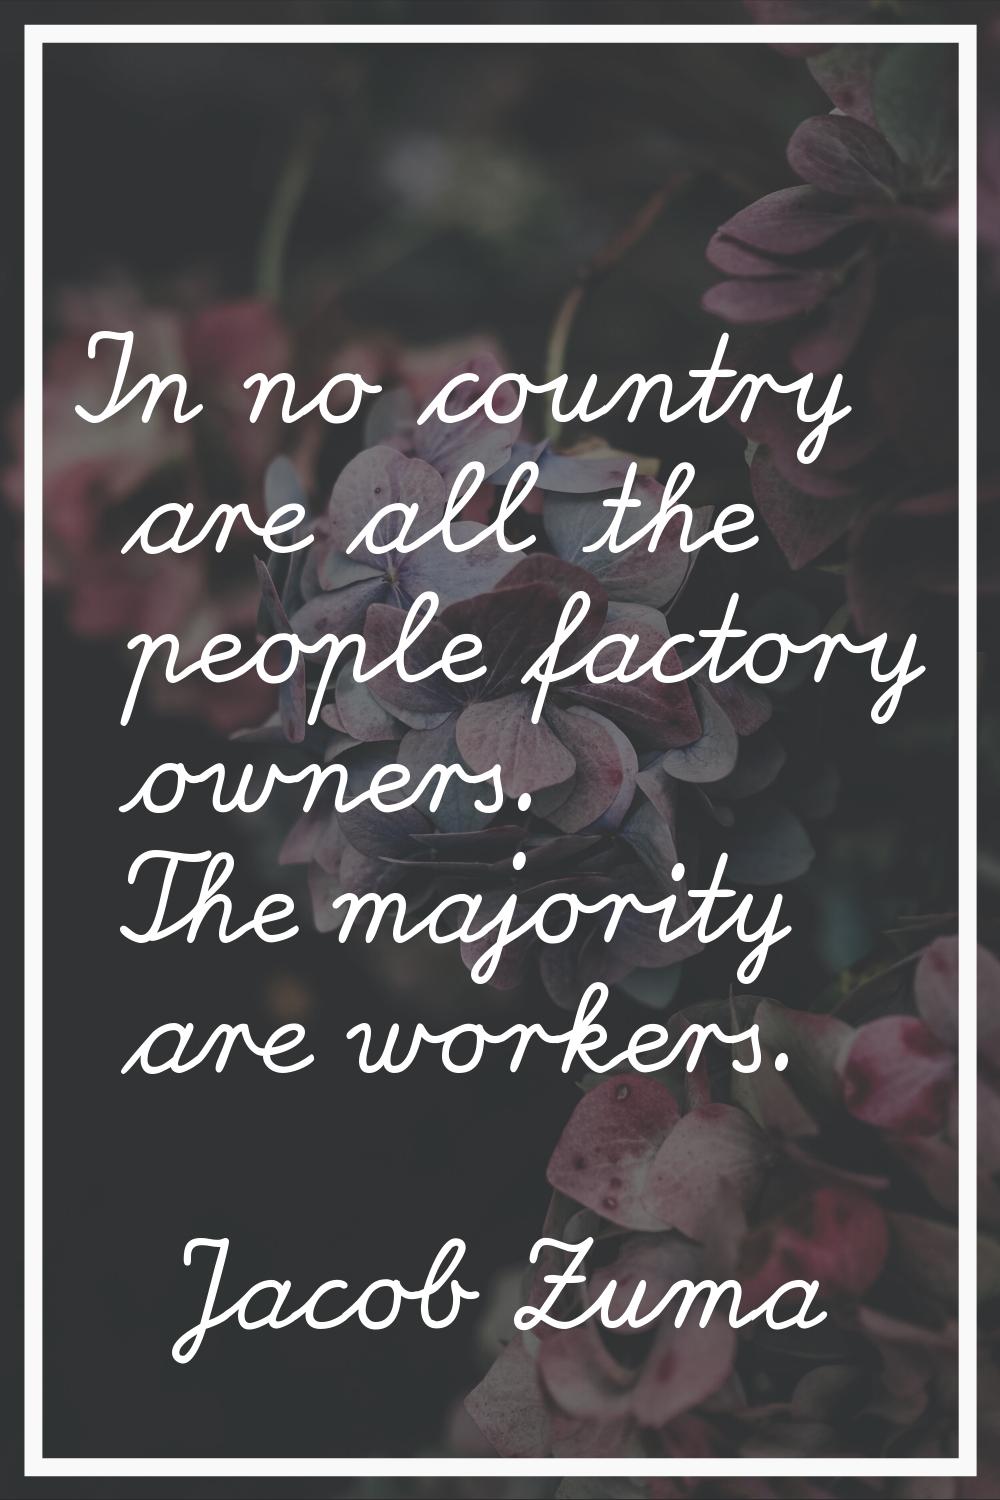 In no country are all the people factory owners. The majority are workers.